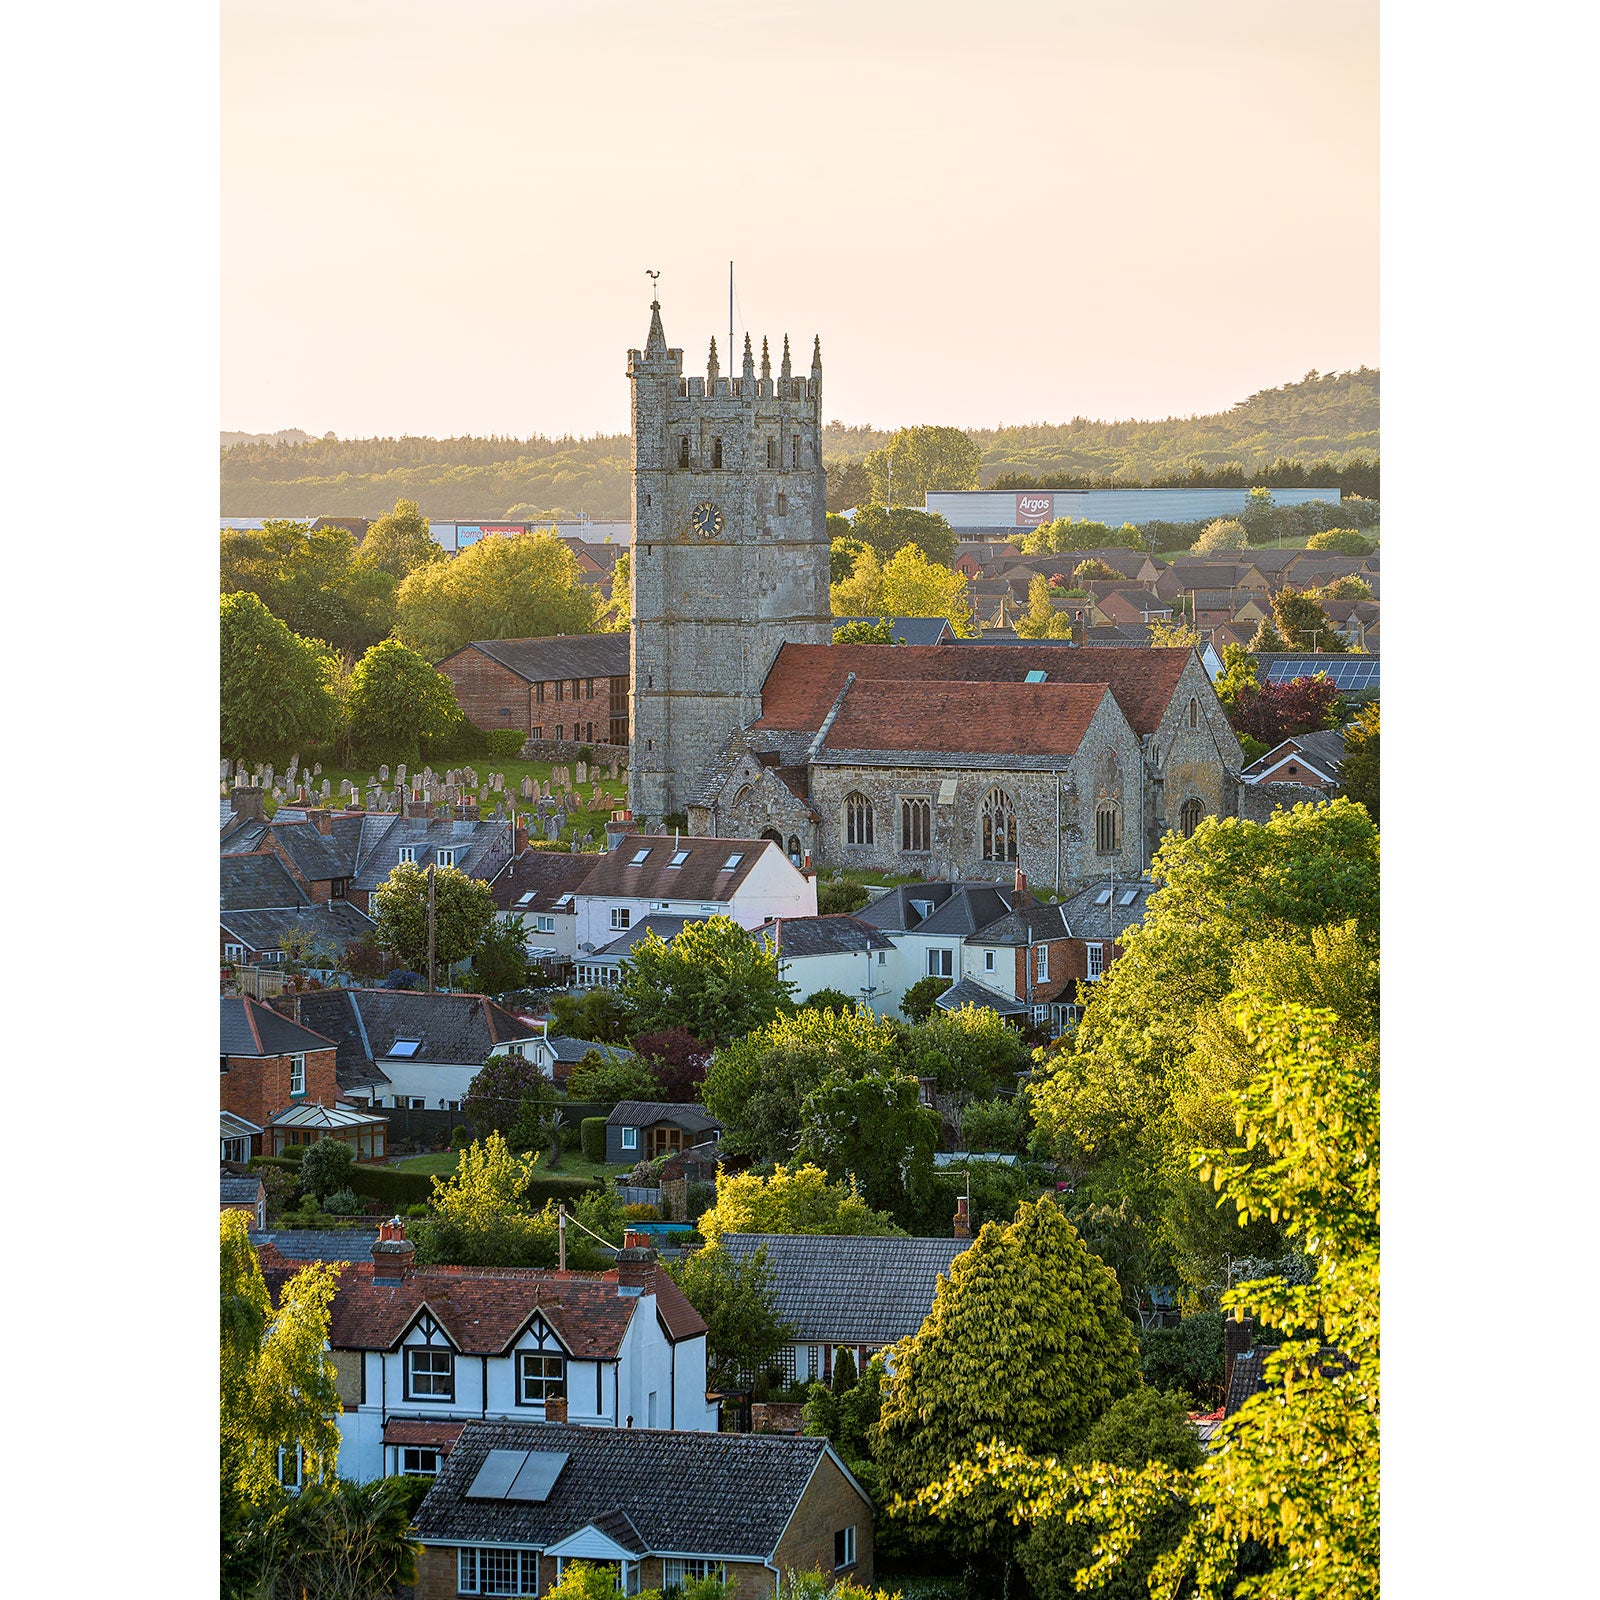 Sunset illuminating St. Mary's Church in Carisbrooke on the Isle of Wight captured beautifully by Available Light Photography, with a prominent church tower surrounded by lush greenery.